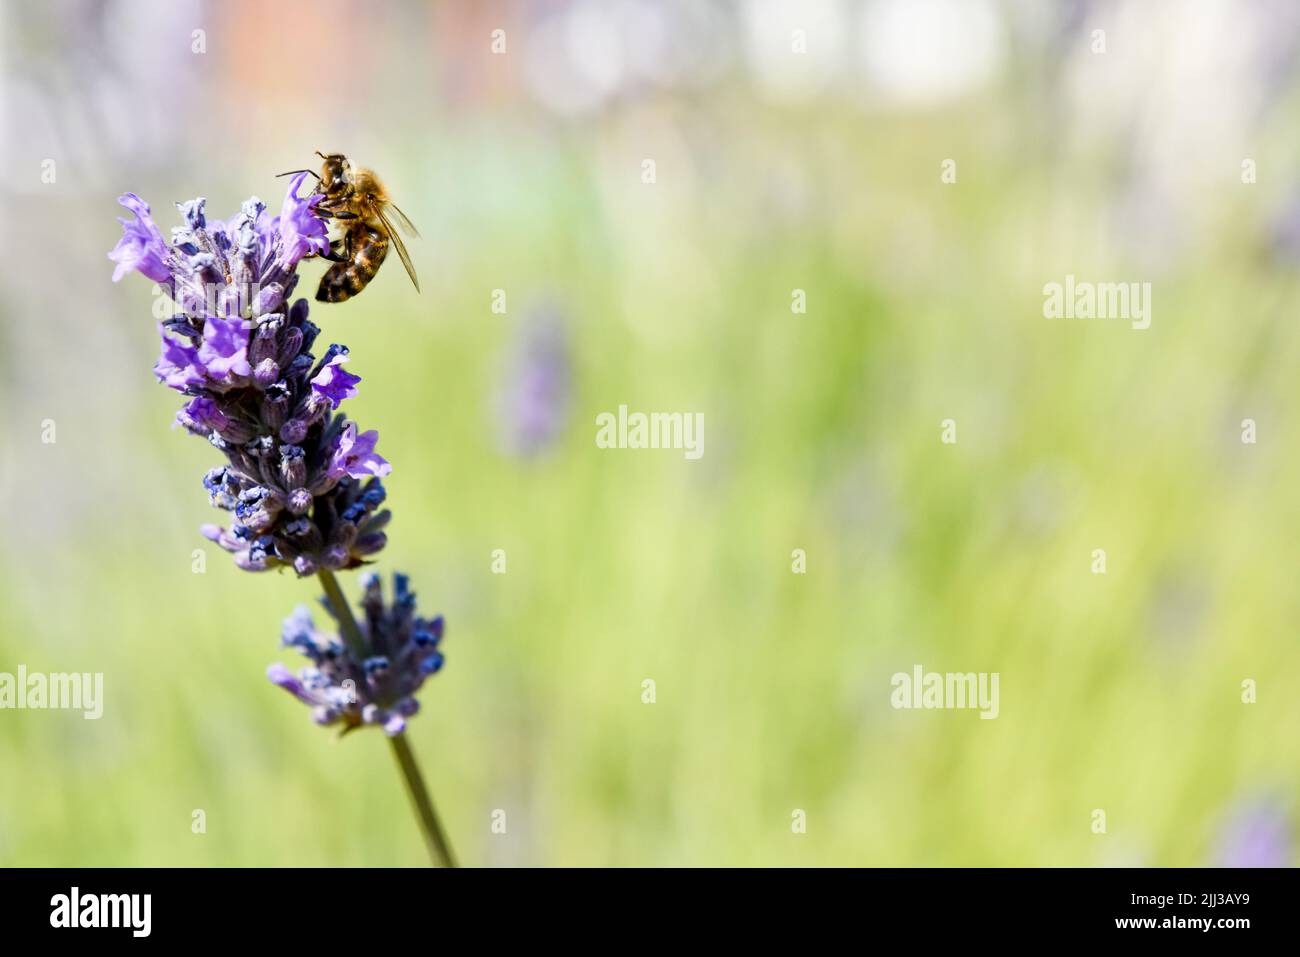 A honey bee collecting pollen from a flower as part of the making honey process Stock Photo